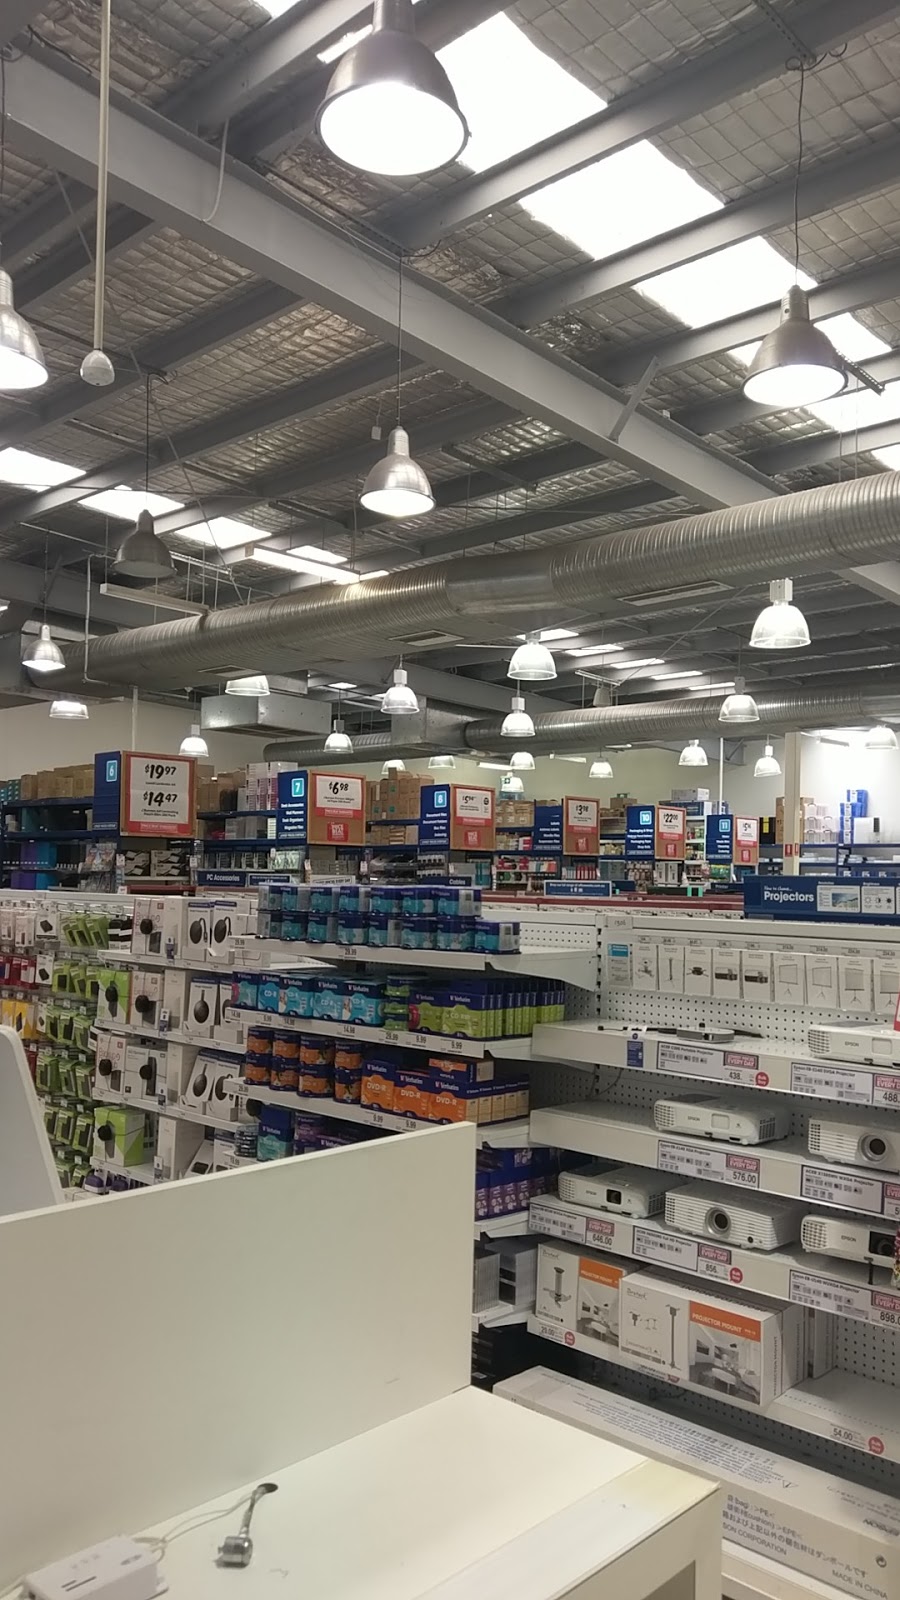 Officeworks Epping | electronics store | 550-650 High St, Epping VIC 3076, Australia | 0394010300 OR +61 3 9401 0300